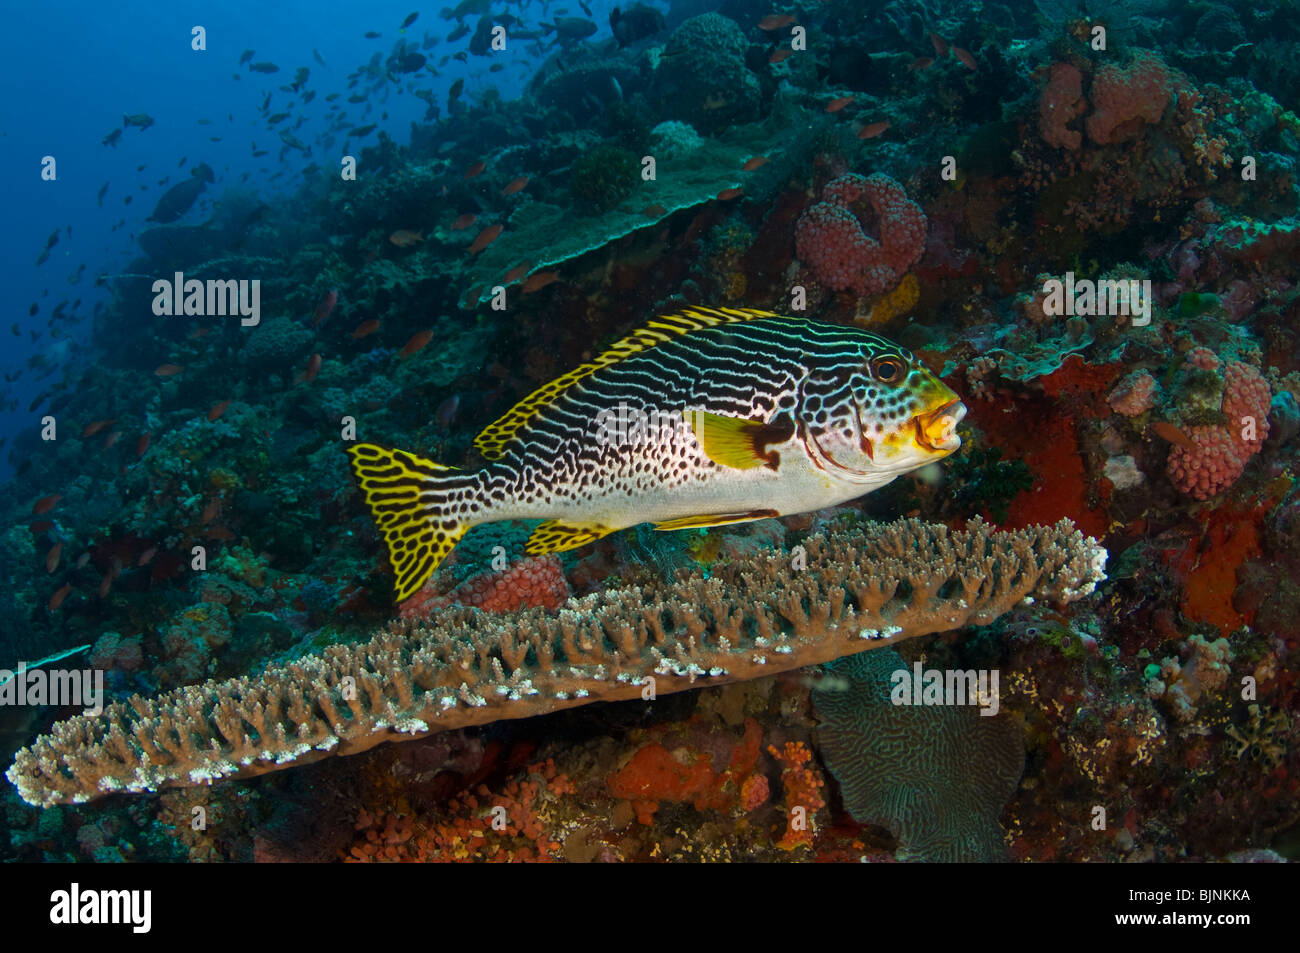 Diagonal-banded sweetlips, Plectorhinchus lineatus, on coral reef Current City, Komodo National Park, Indonesia Stock Photo